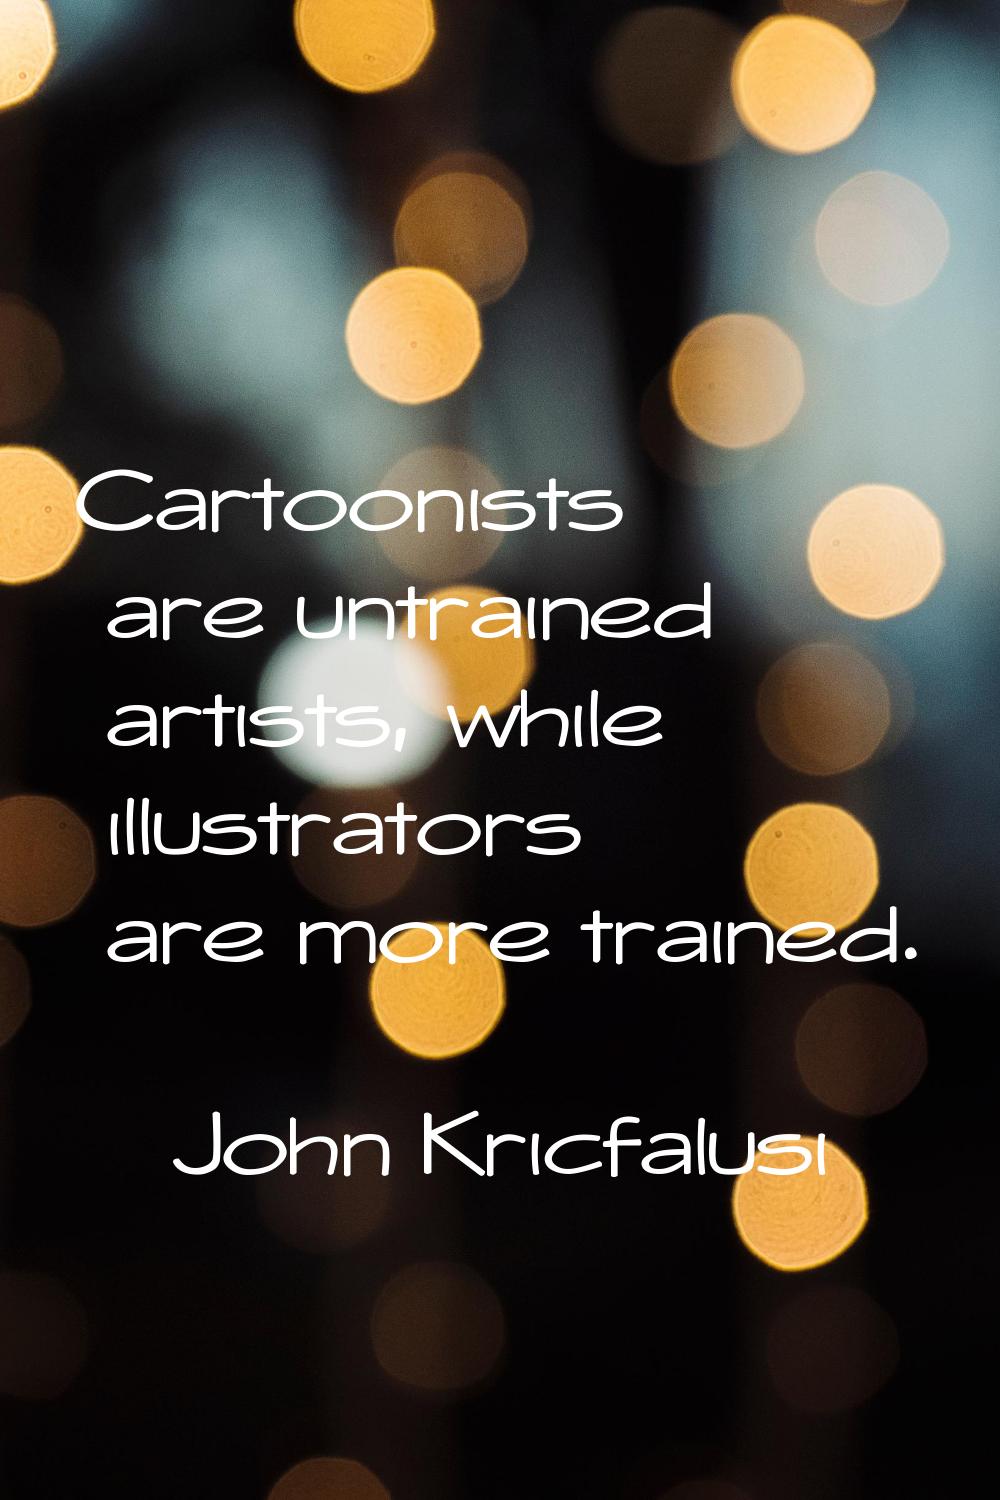 Cartoonists are untrained artists, while illustrators are more trained.